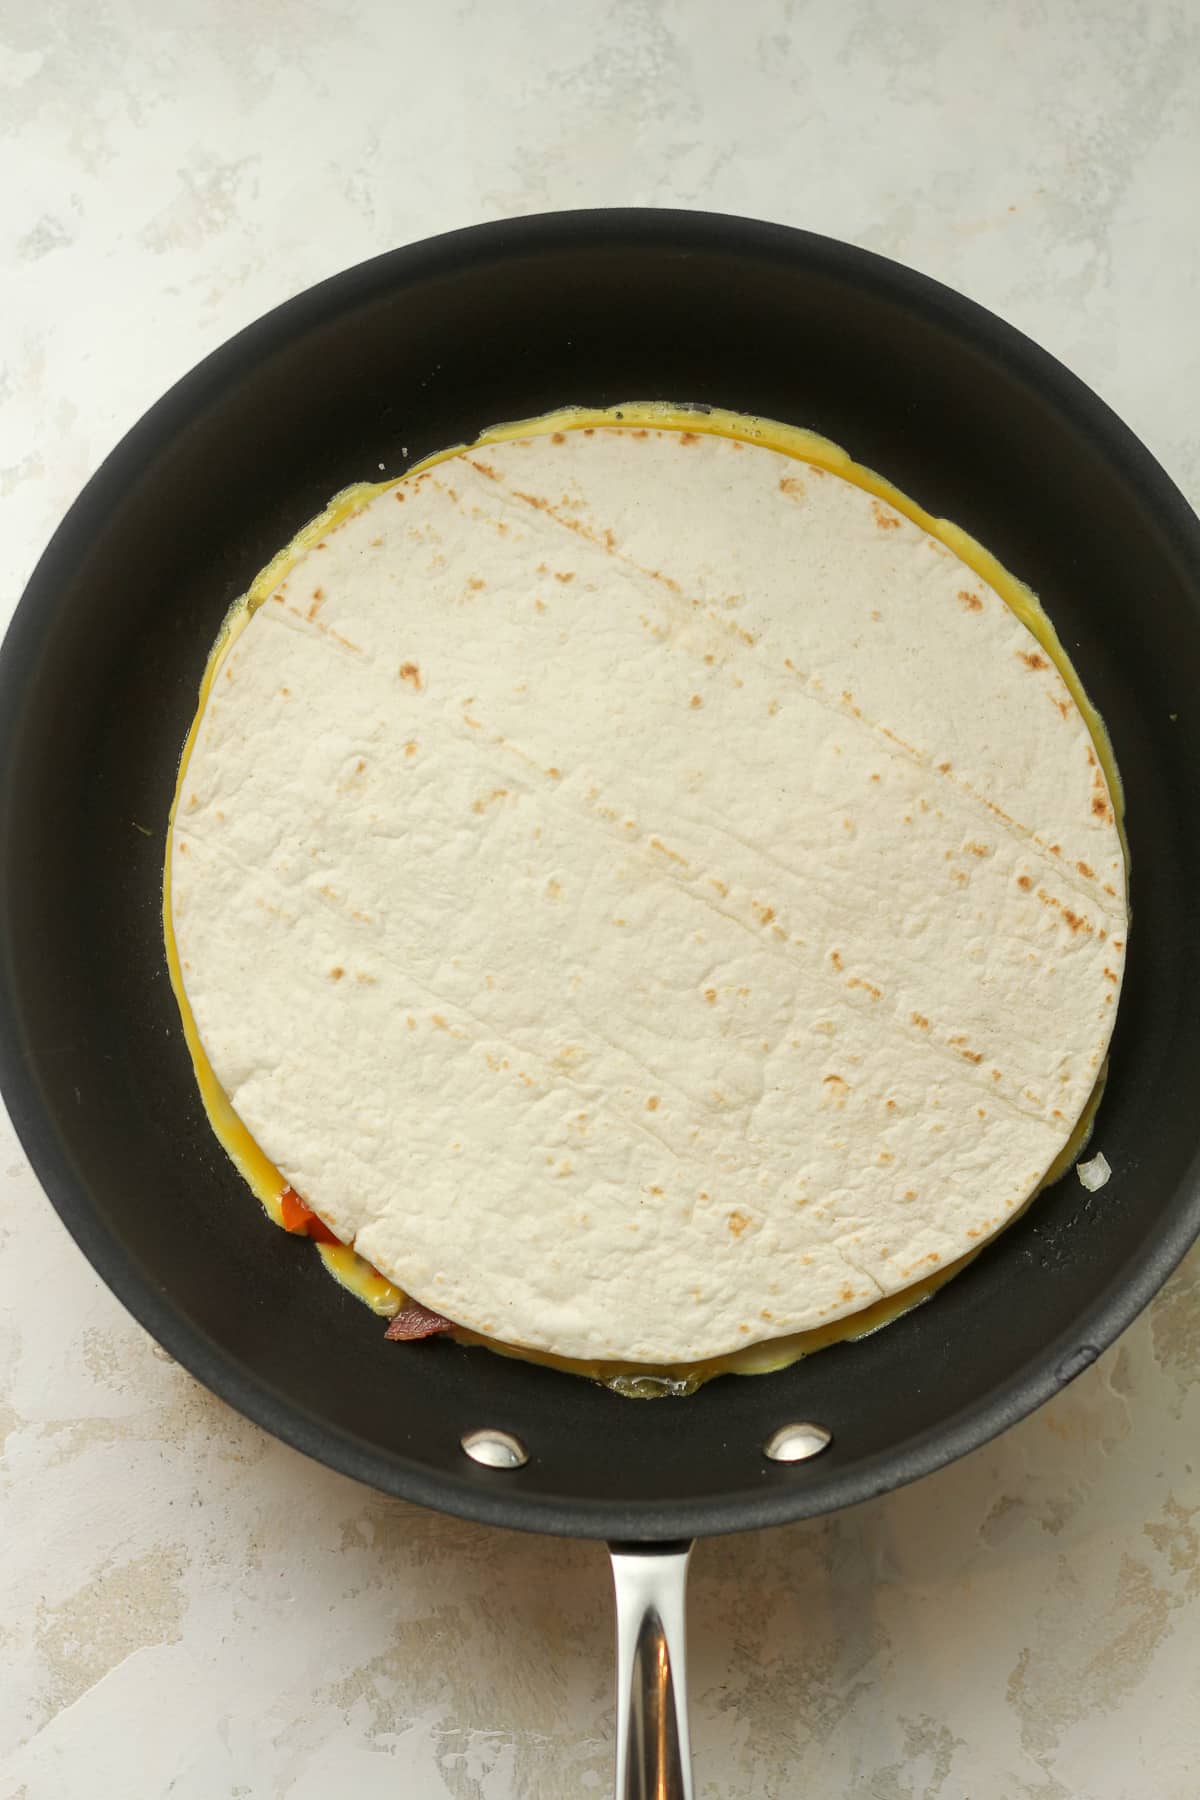 A pan of the egg mixture with a tortilla on top.